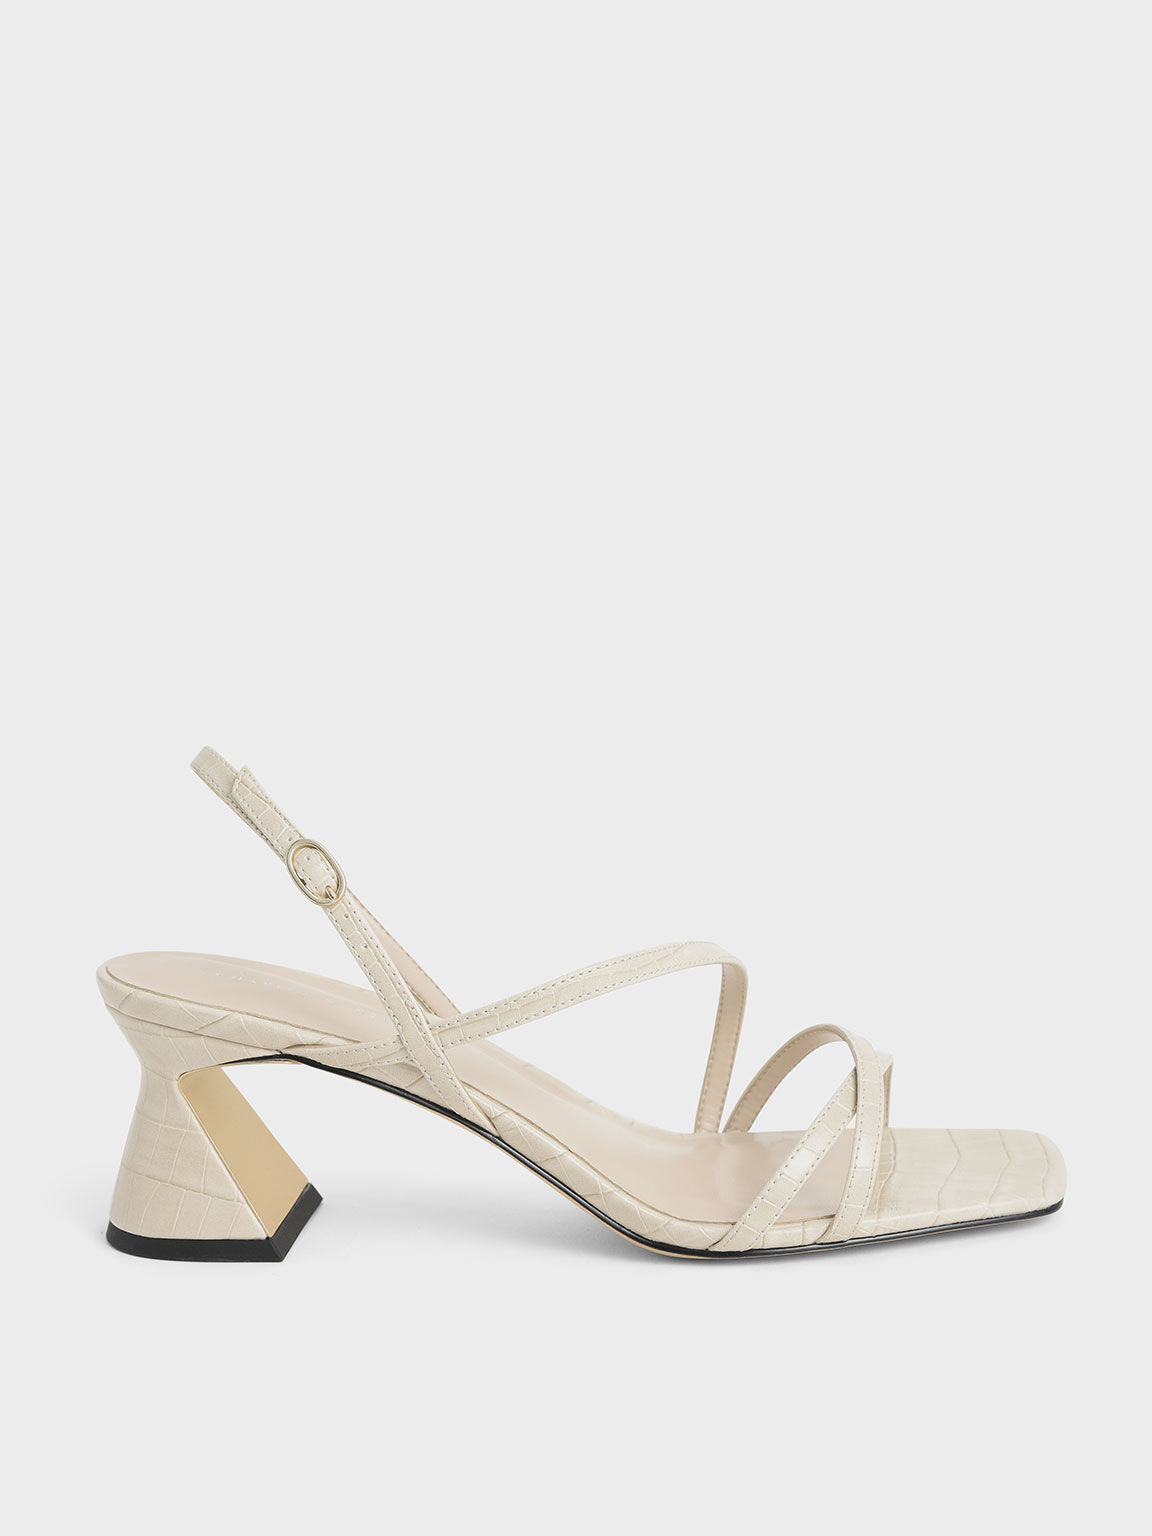 Croc-Effect Strappy Heeled Sandals, Animal Print White, hi-res